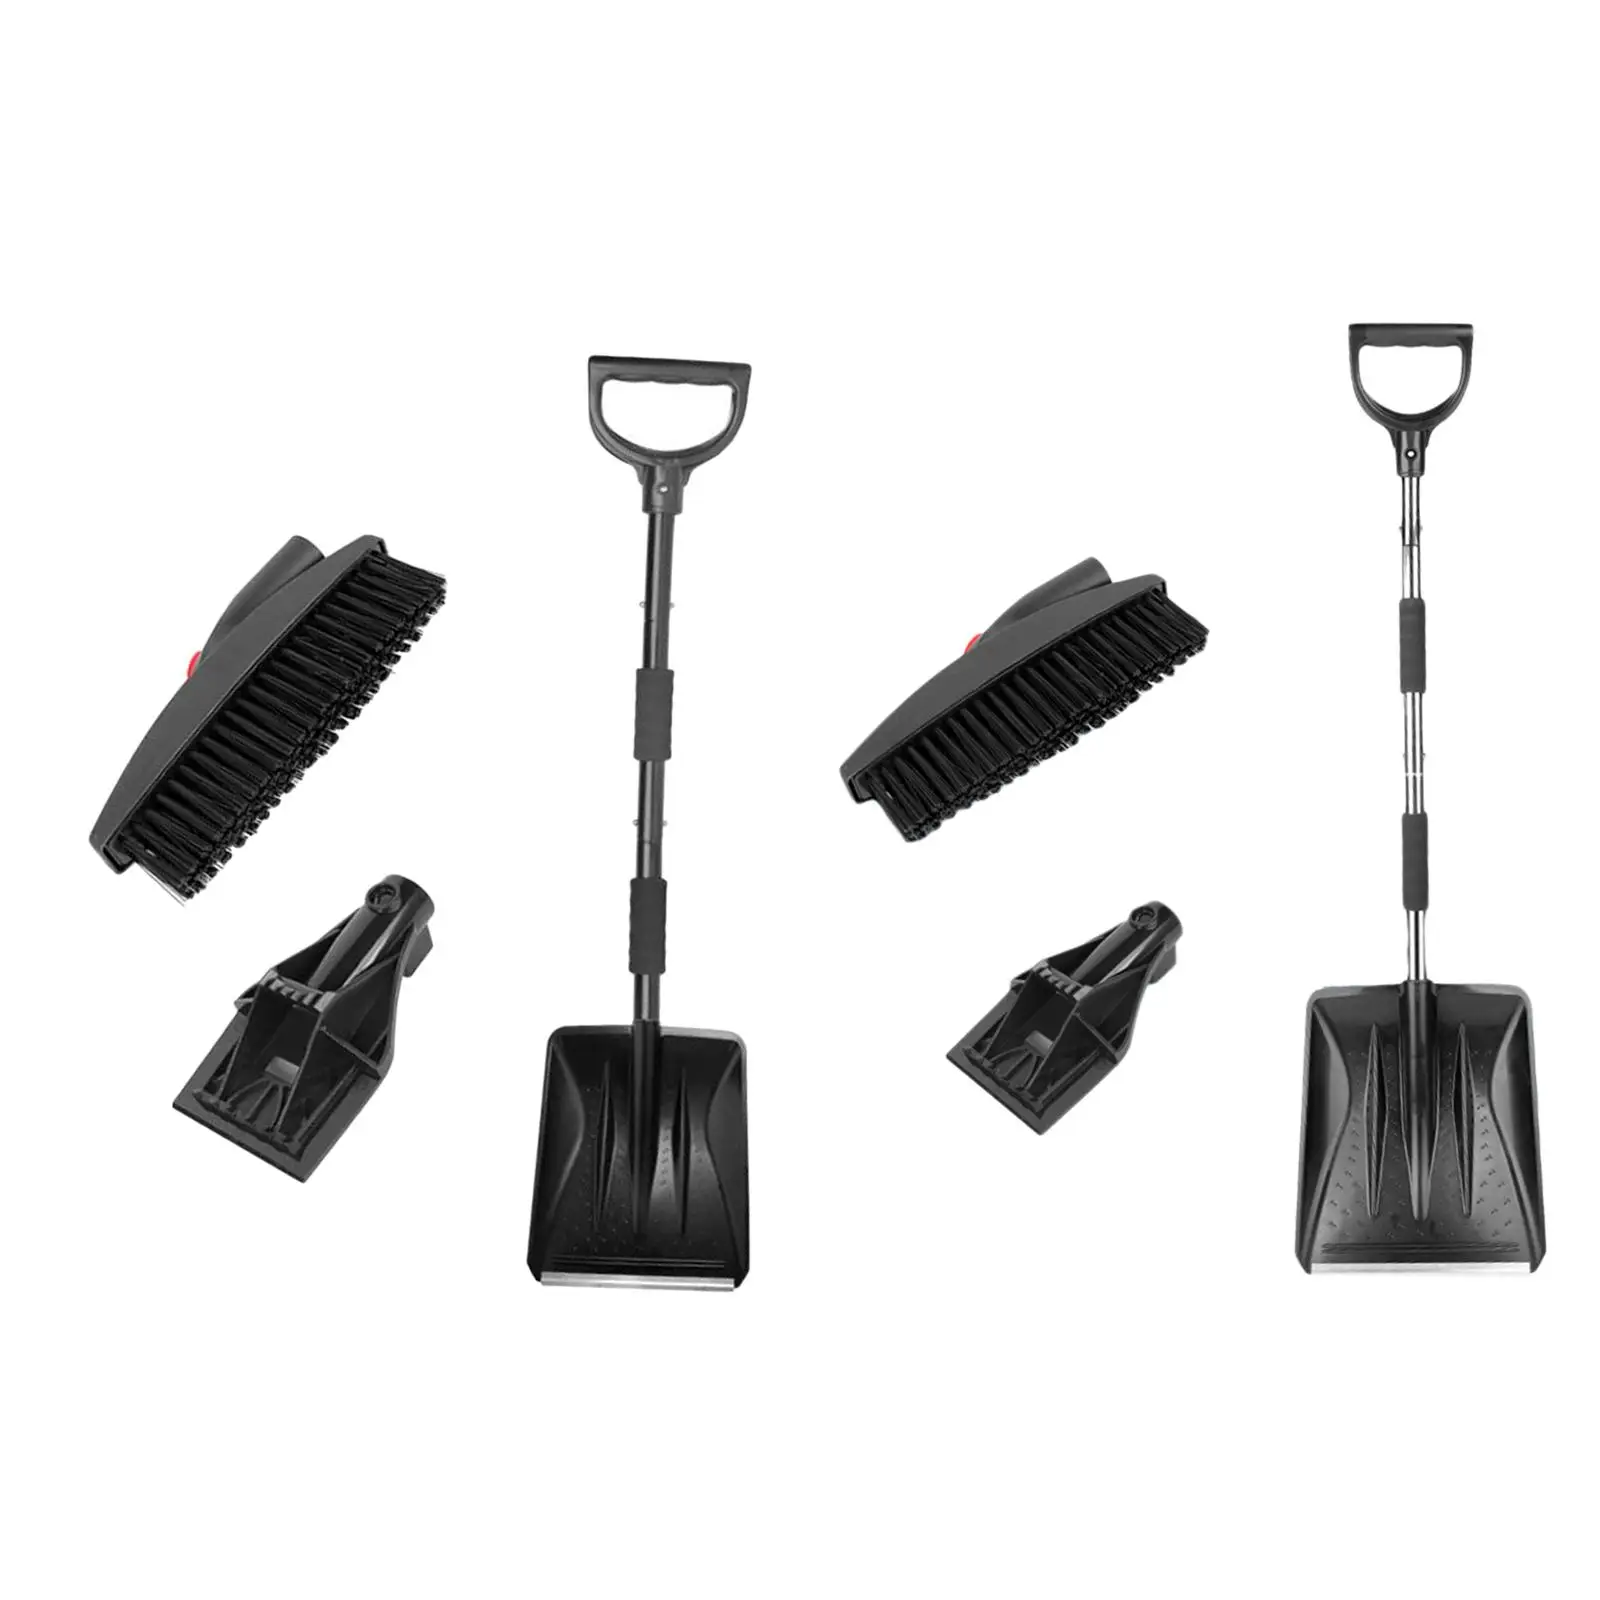 Snow Brush Snow Spade for Car Snow Removal Tools 3 in 1 Snow Removal Brush for Car Accessories Winter Outdoor